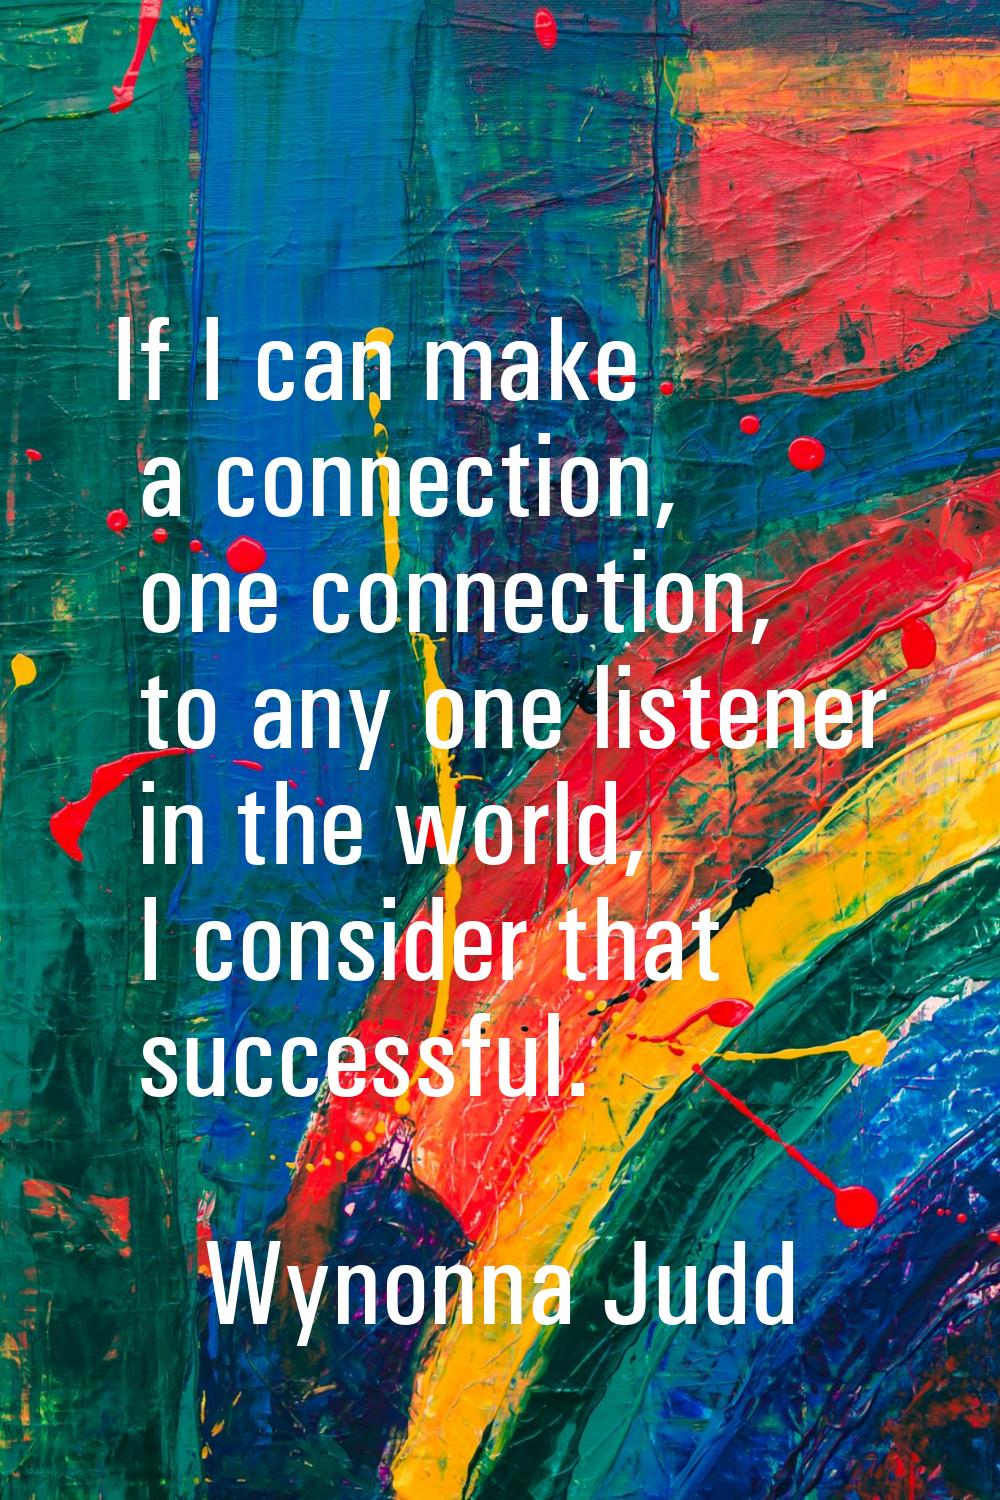 If I can make a connection, one connection, to any one listener in the world, I consider that succe